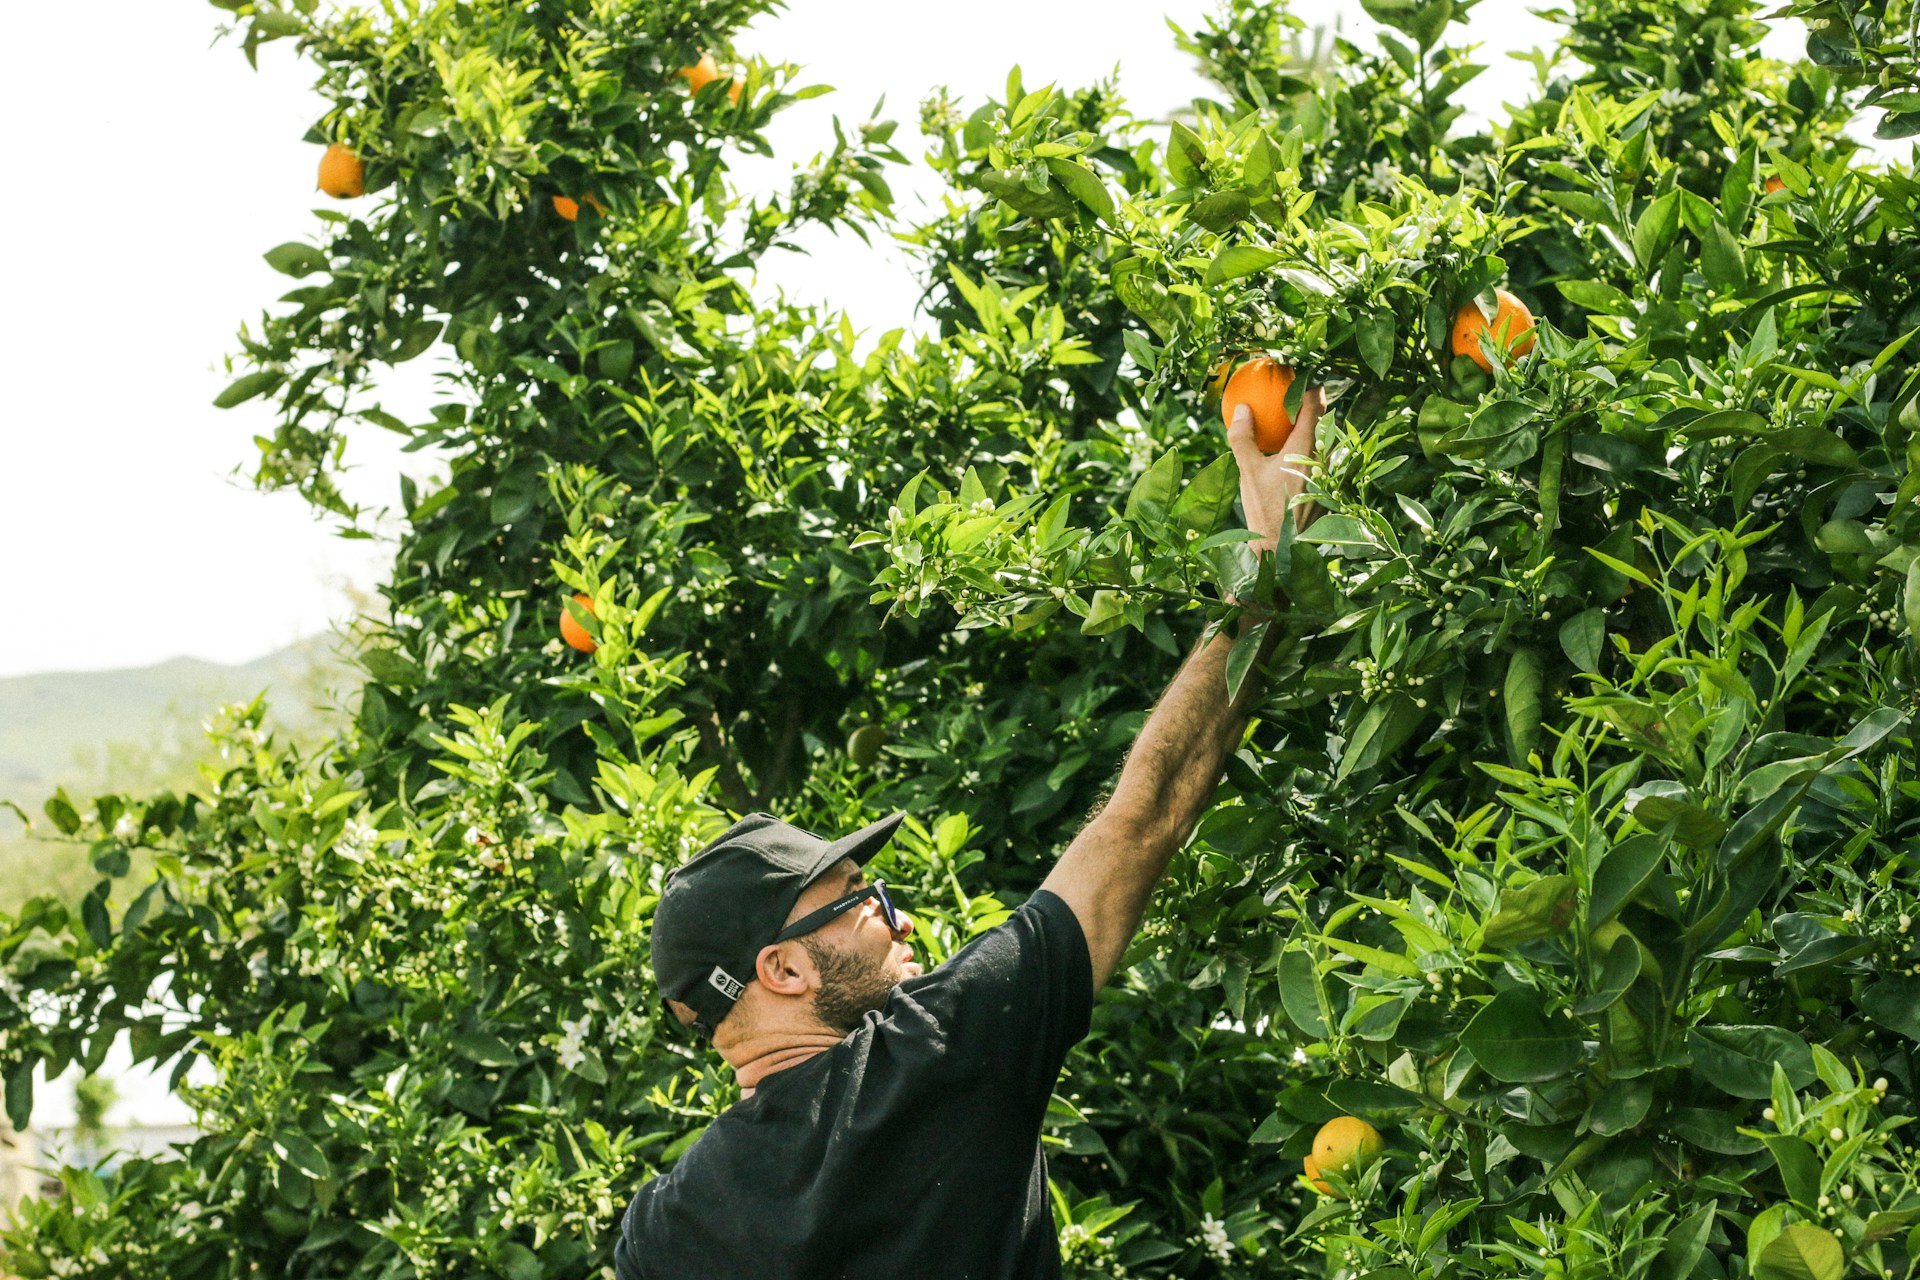 Canadian agriculture sustainability funding boosts innovation with grants for fruit growers.